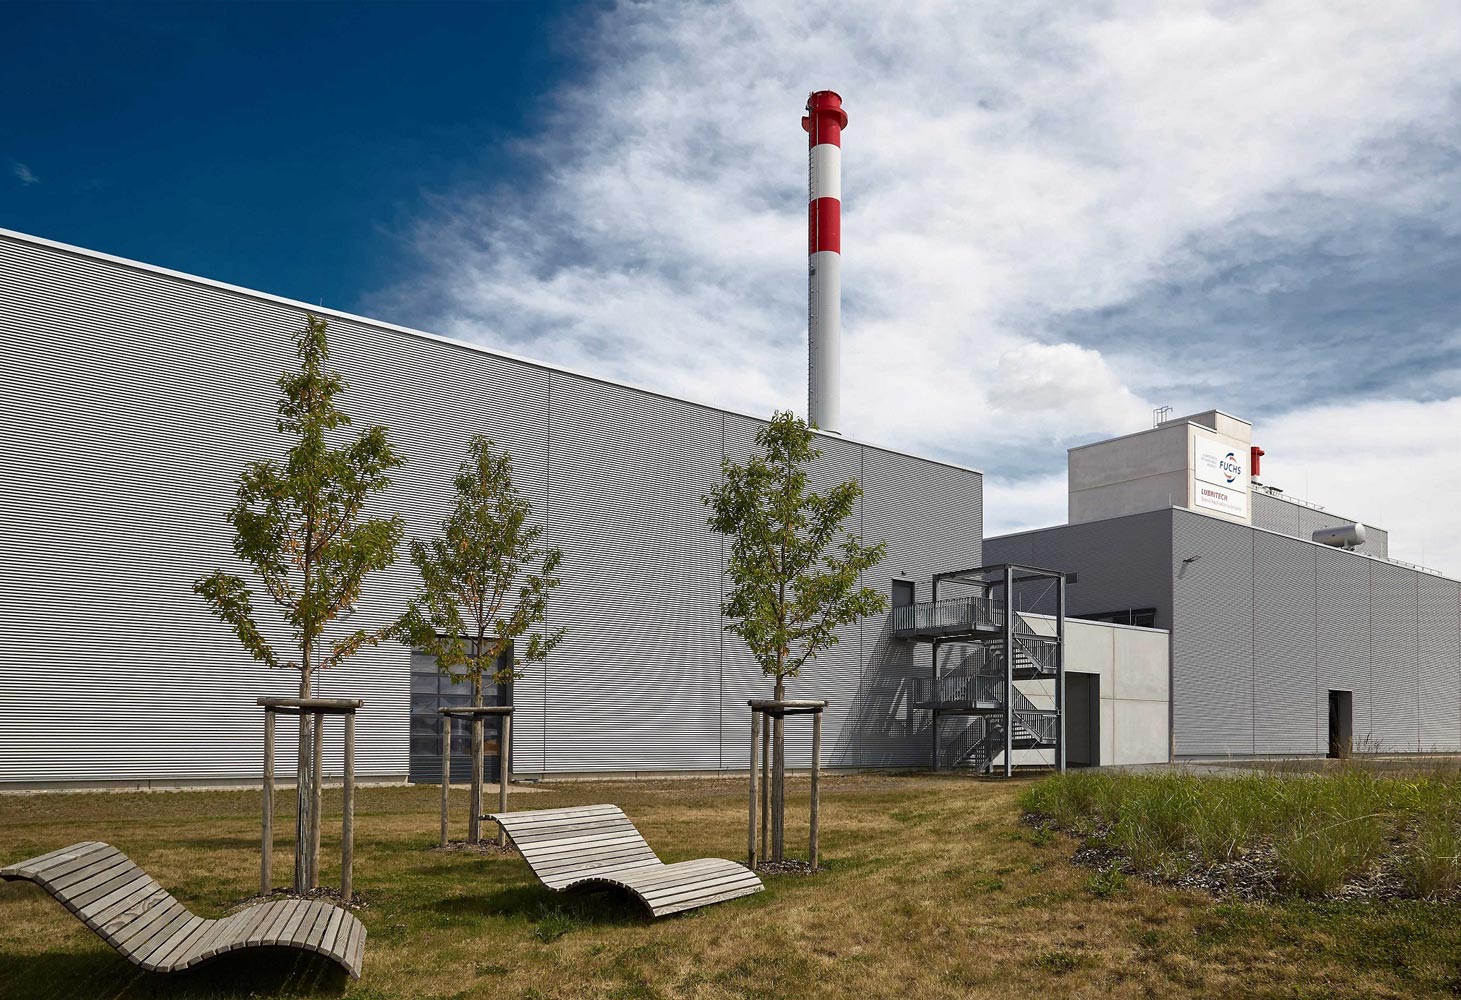 Fuchs Group JVs and subsidiaries will also be carbon neutral